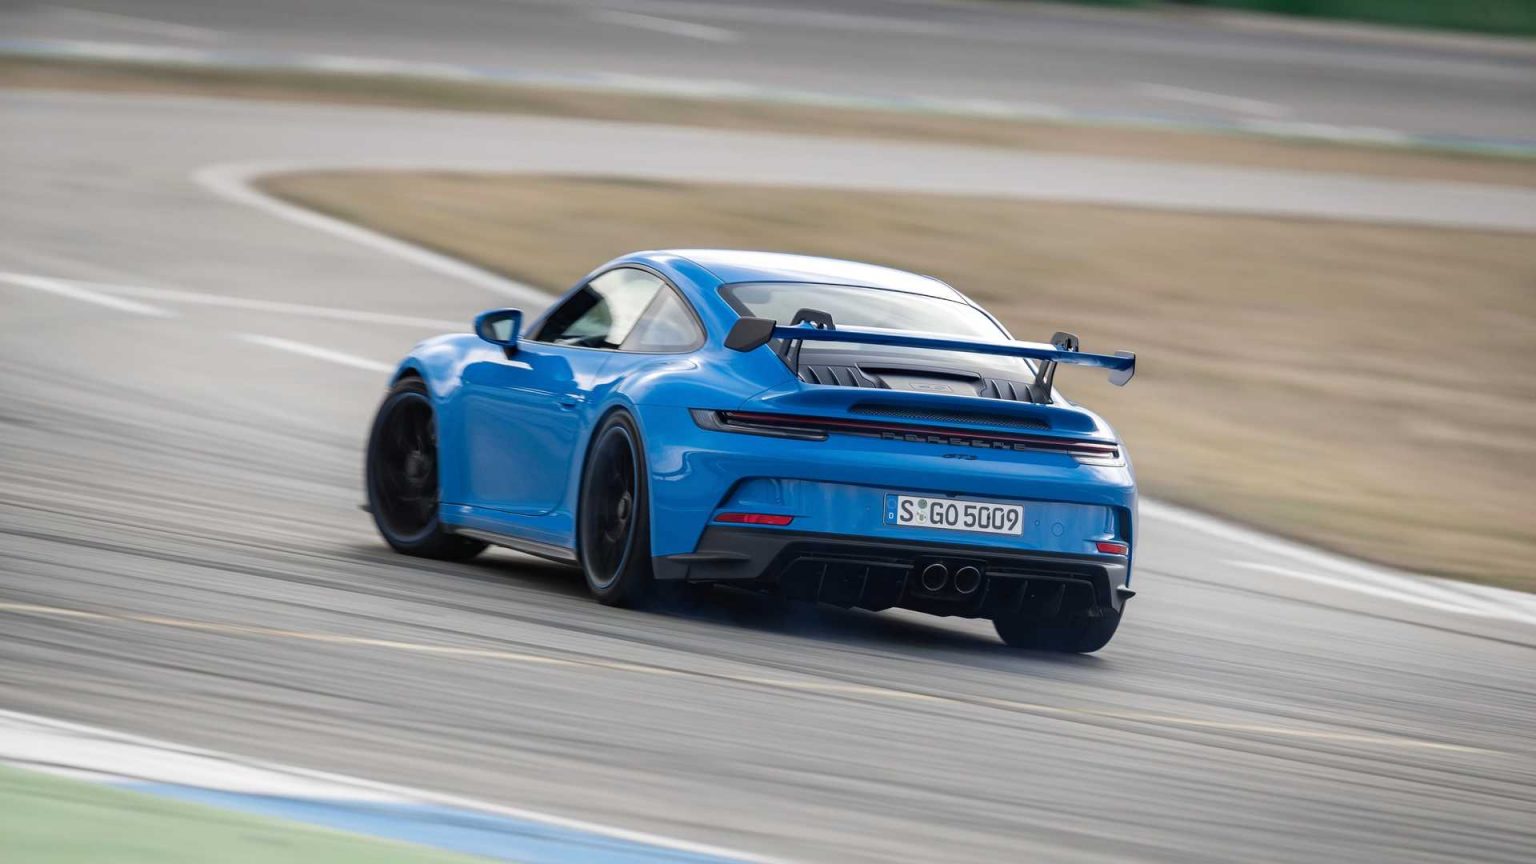 New Porsche 911 GT3 Was Tested For 5,000 km at 300 km/h